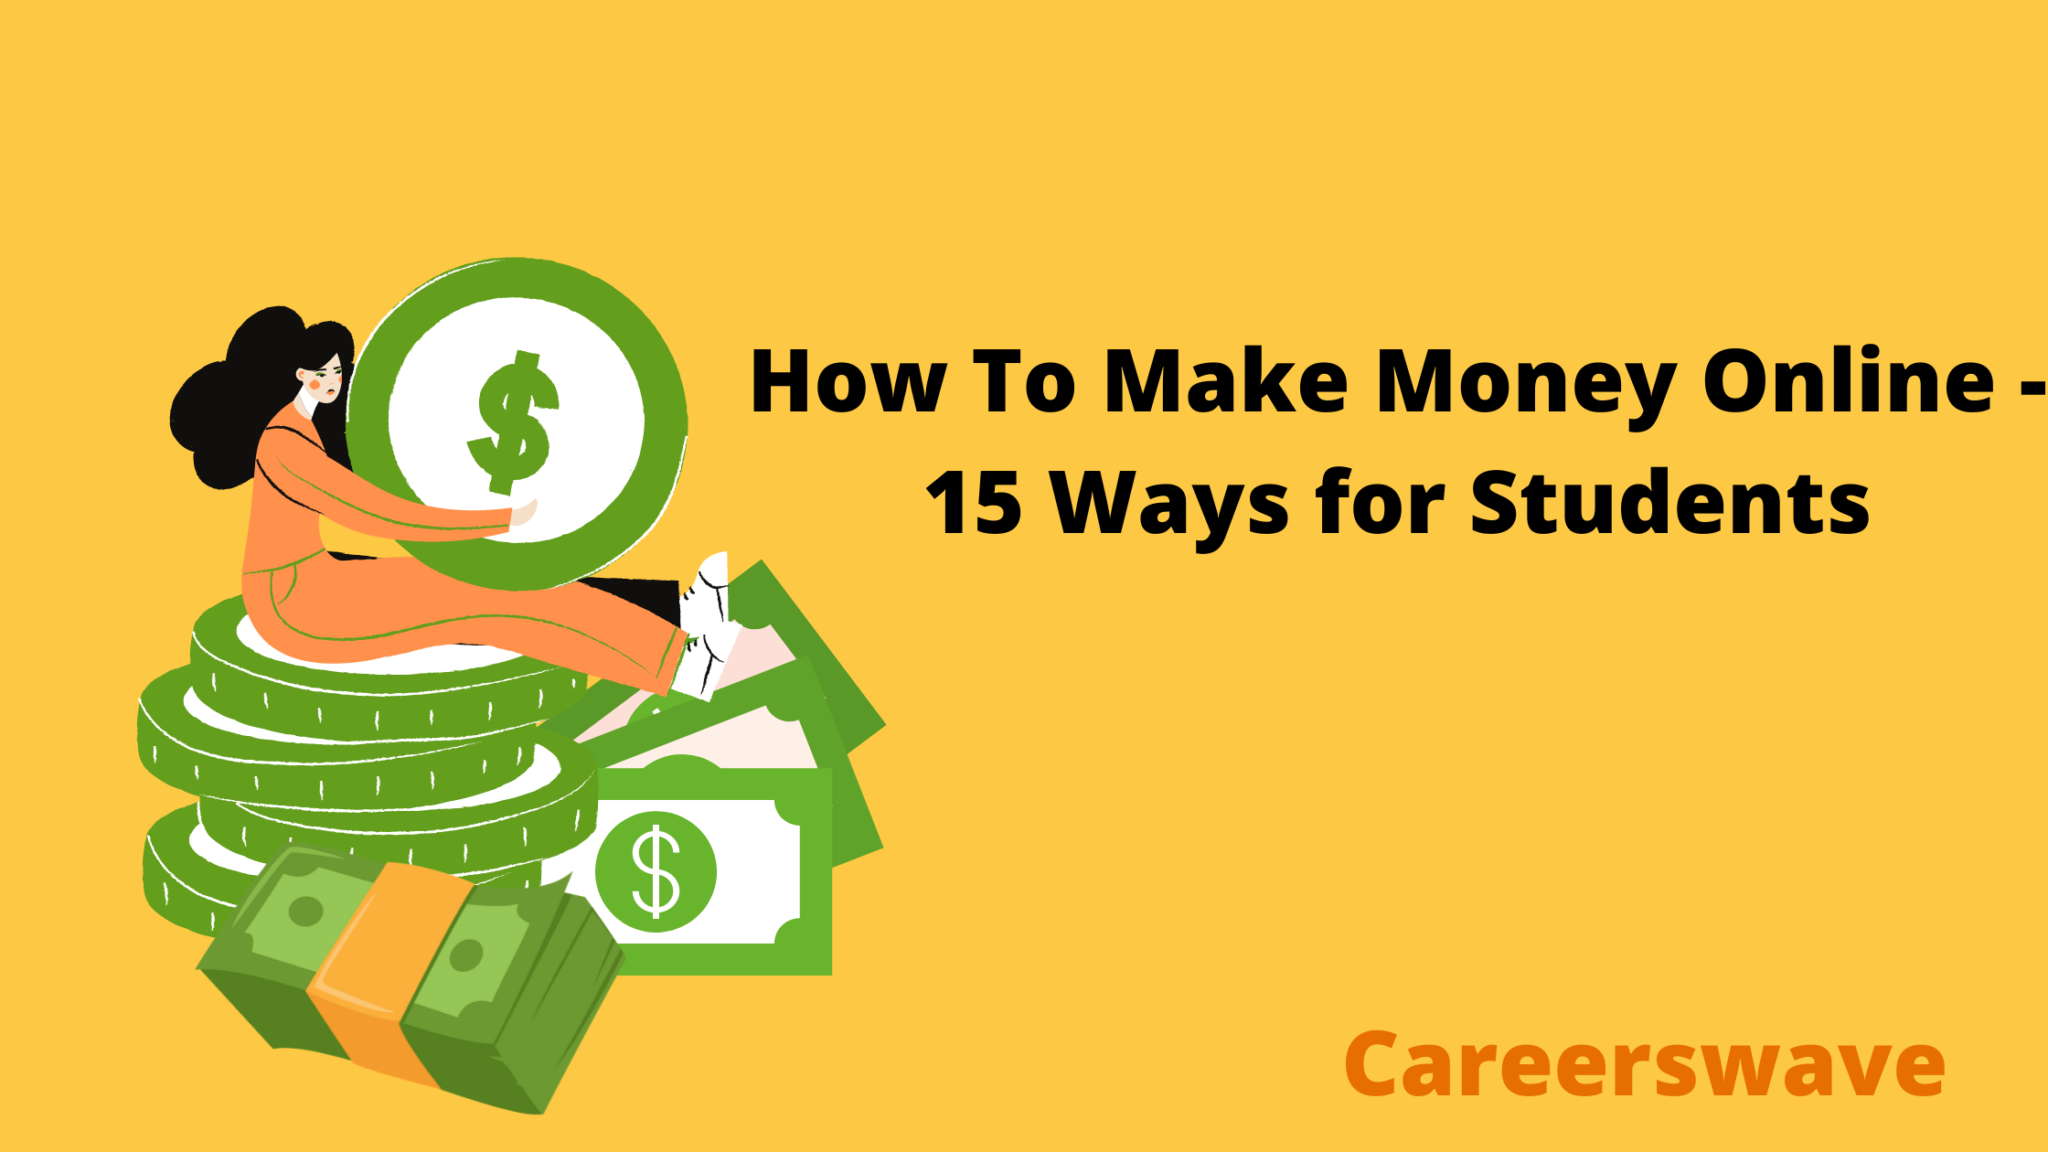 Top 15 ways to earn money online for students 2022